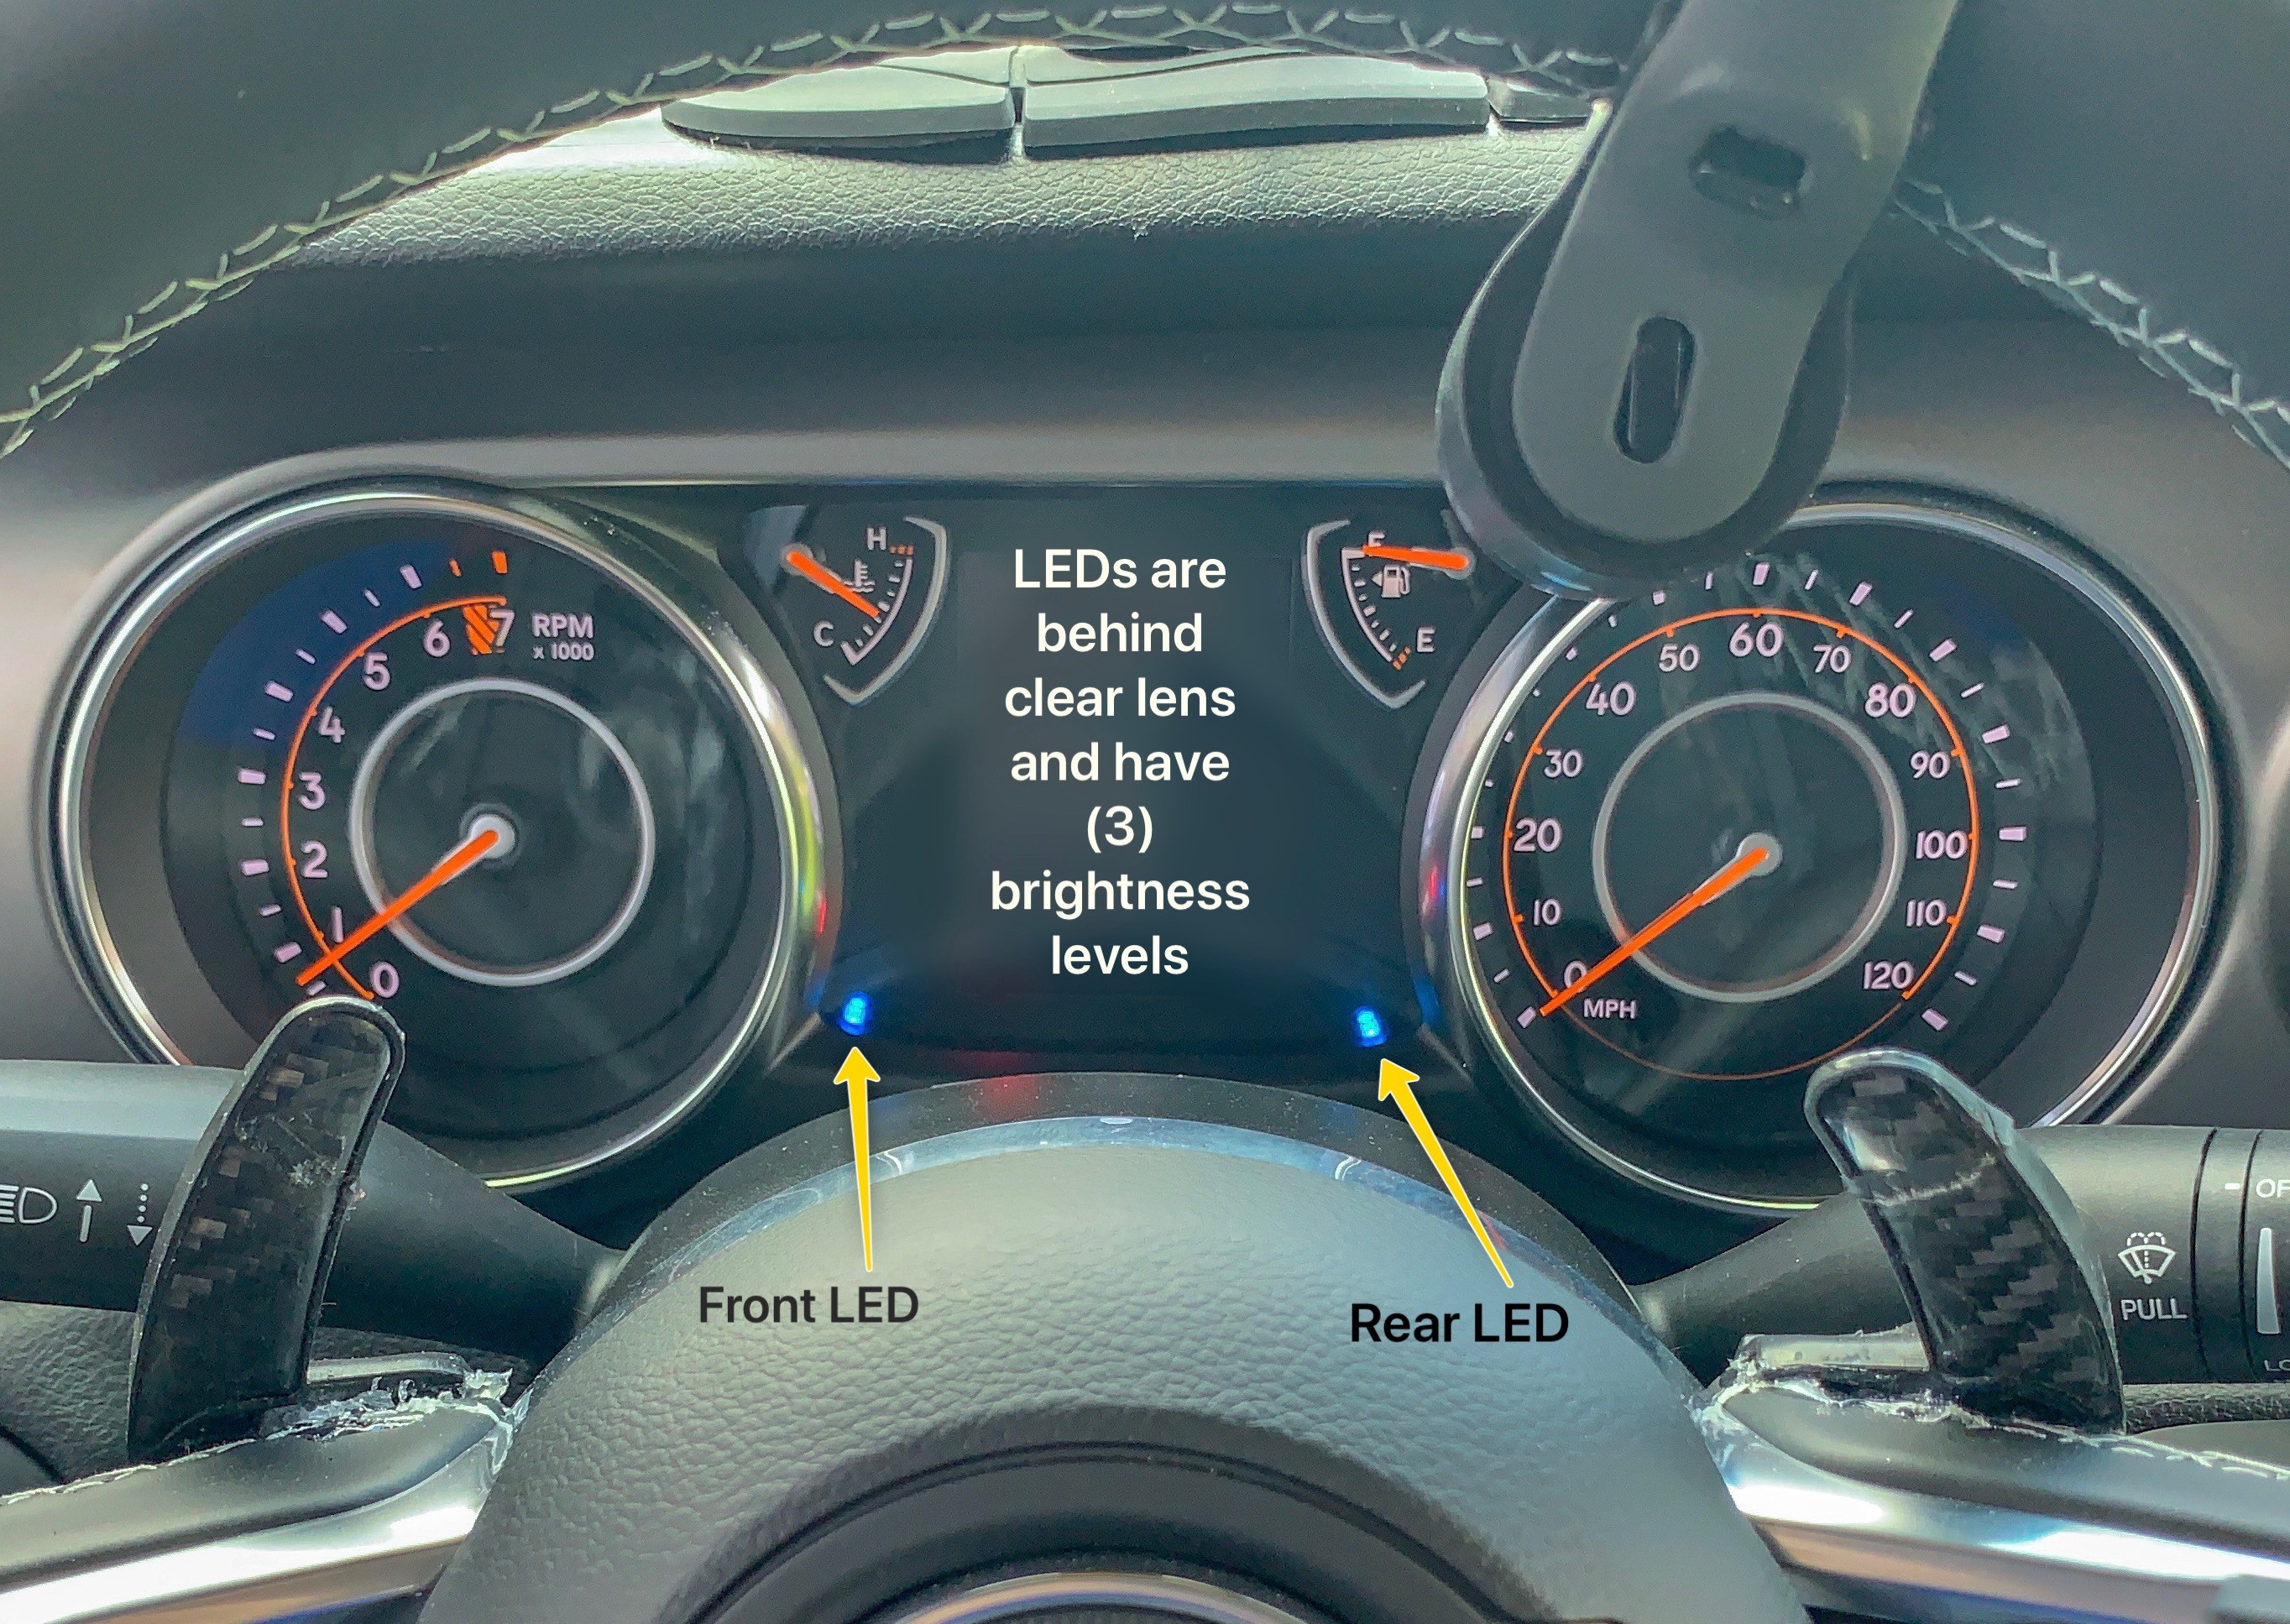 K40 Custom Hidden Alert LED's Installed in the Instrument Cluster of a 2020 Jeep Gladiator in Concord, NC